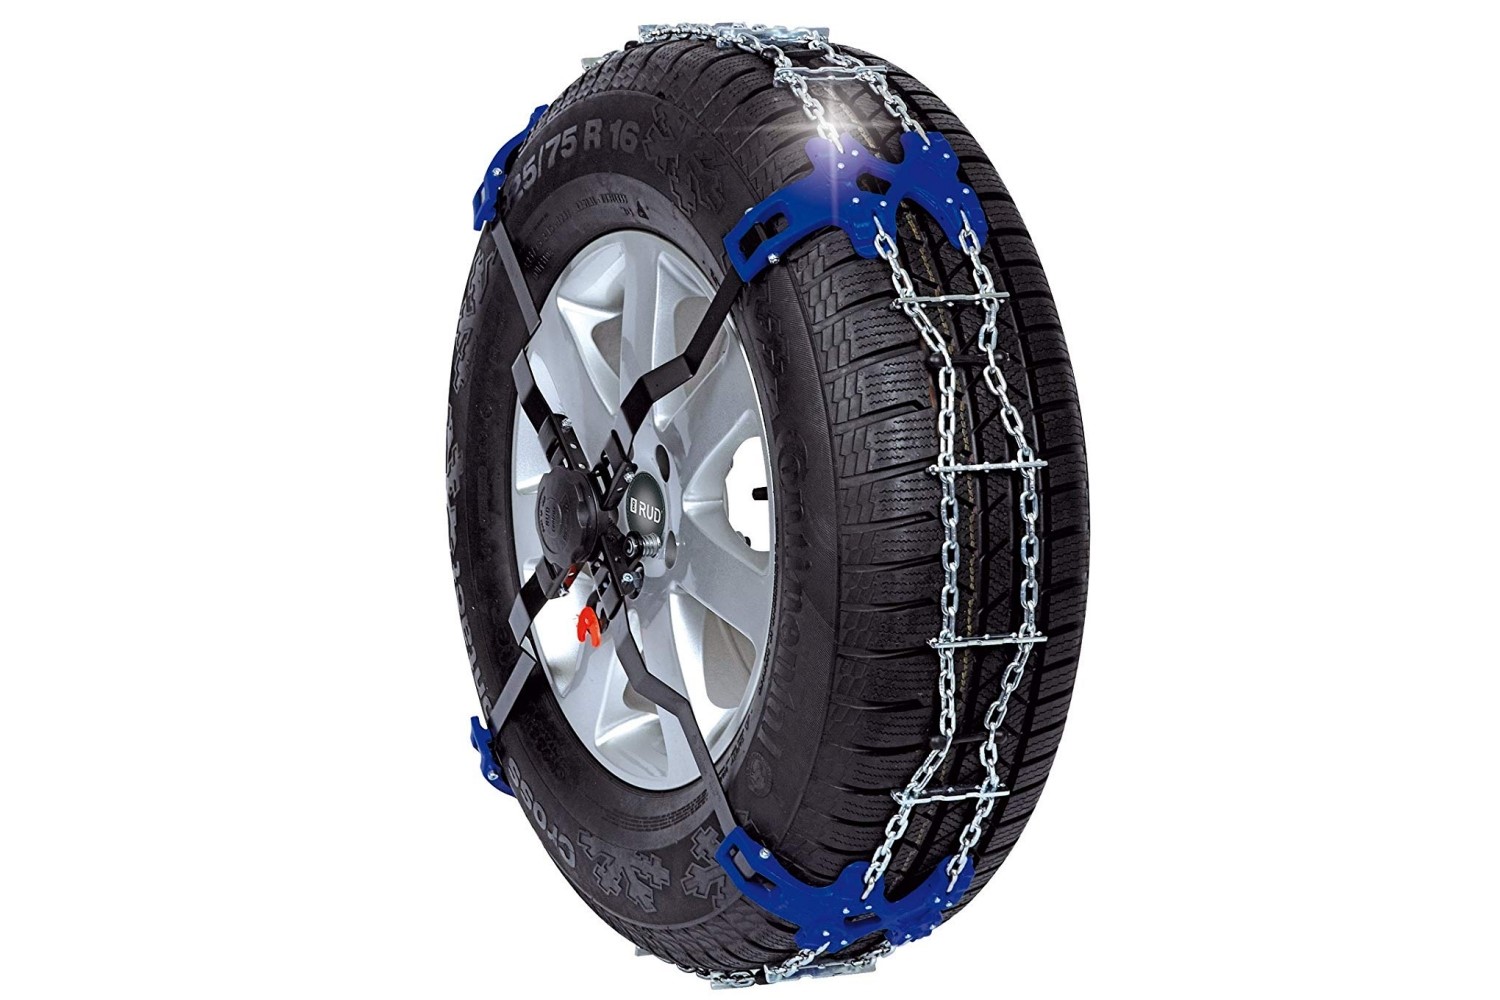 Snow chains 215/65 R16 - RUD Centrax V S895 set 2 pieces